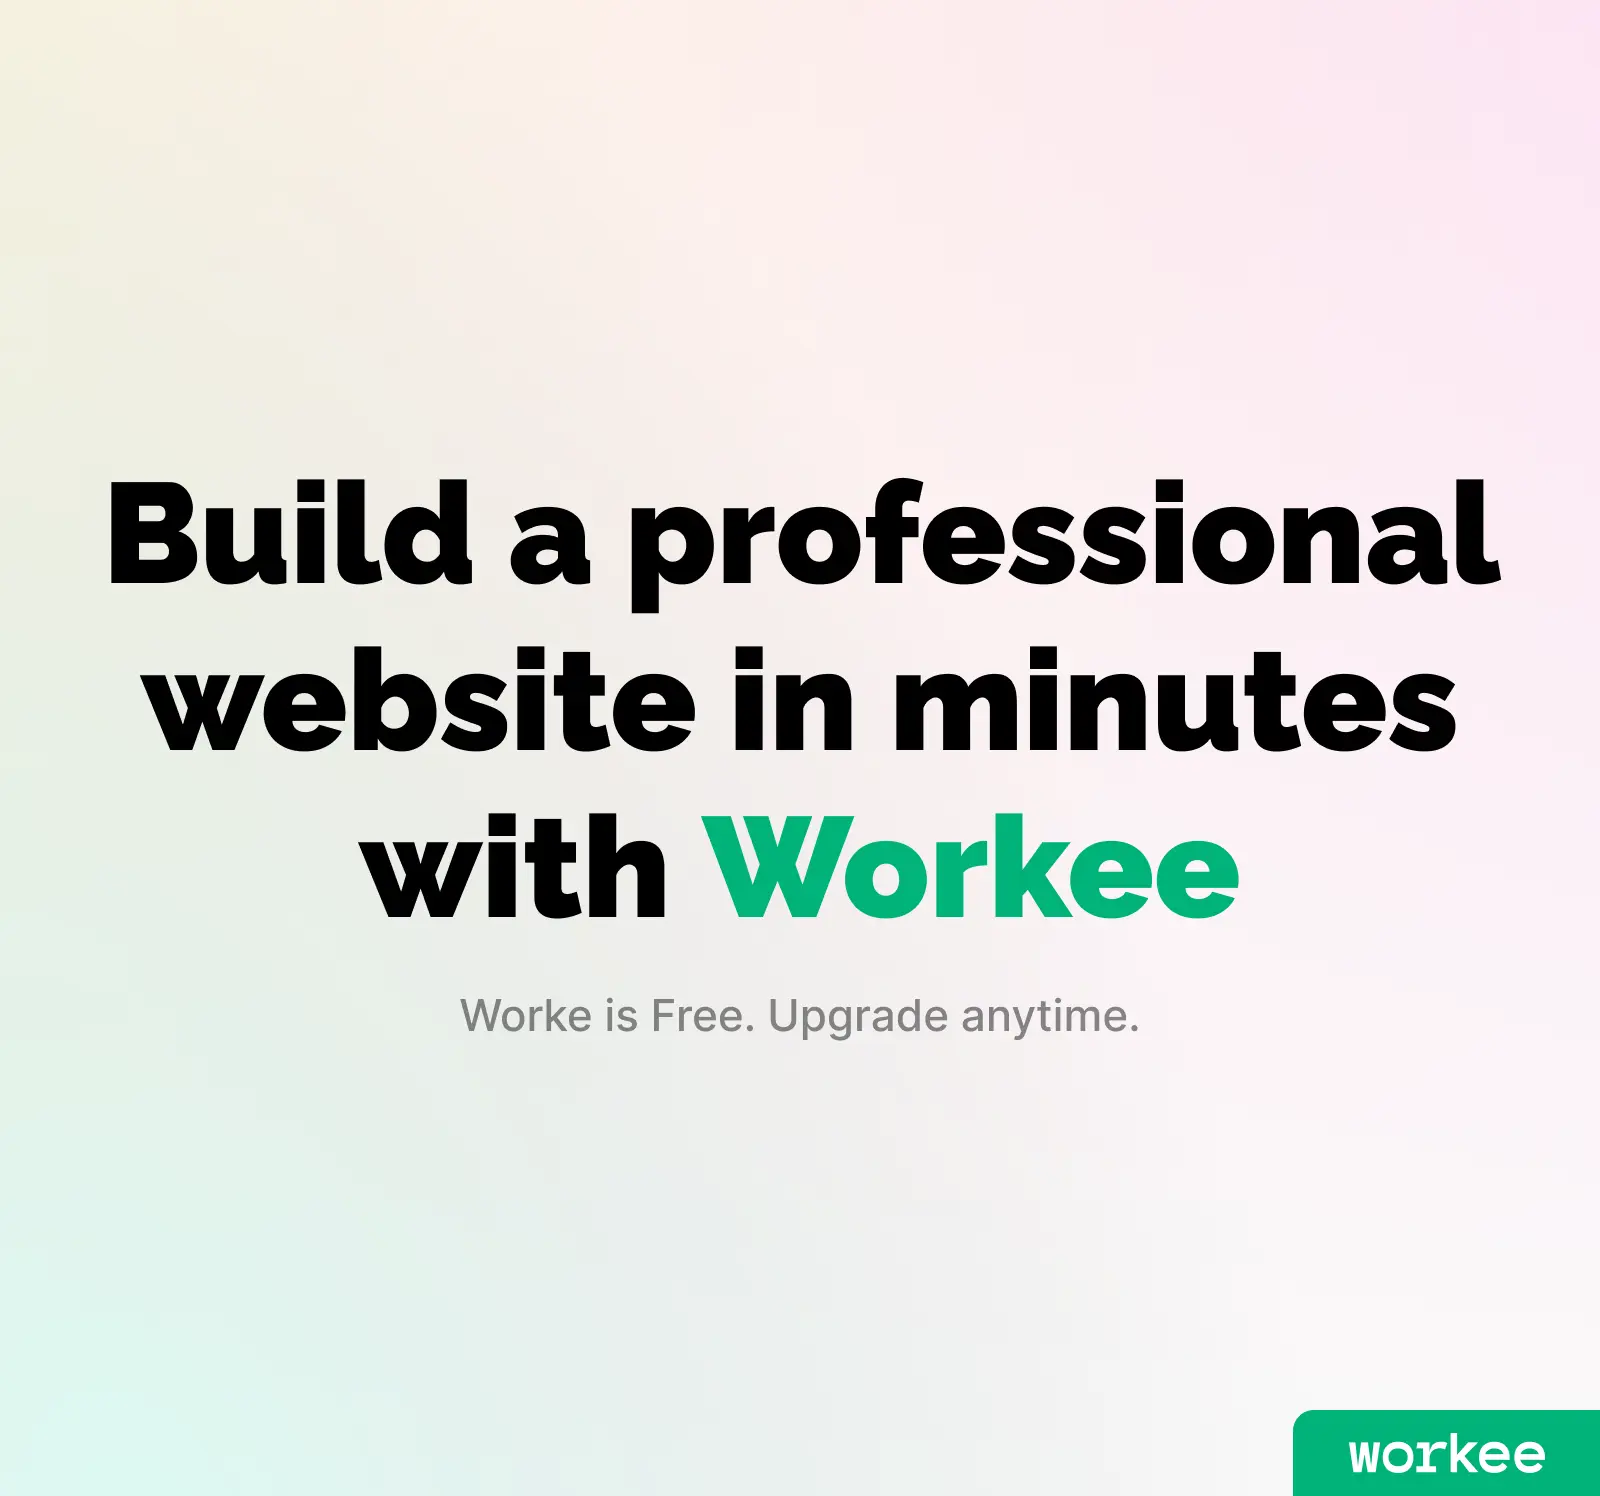 Build your website with Workee.